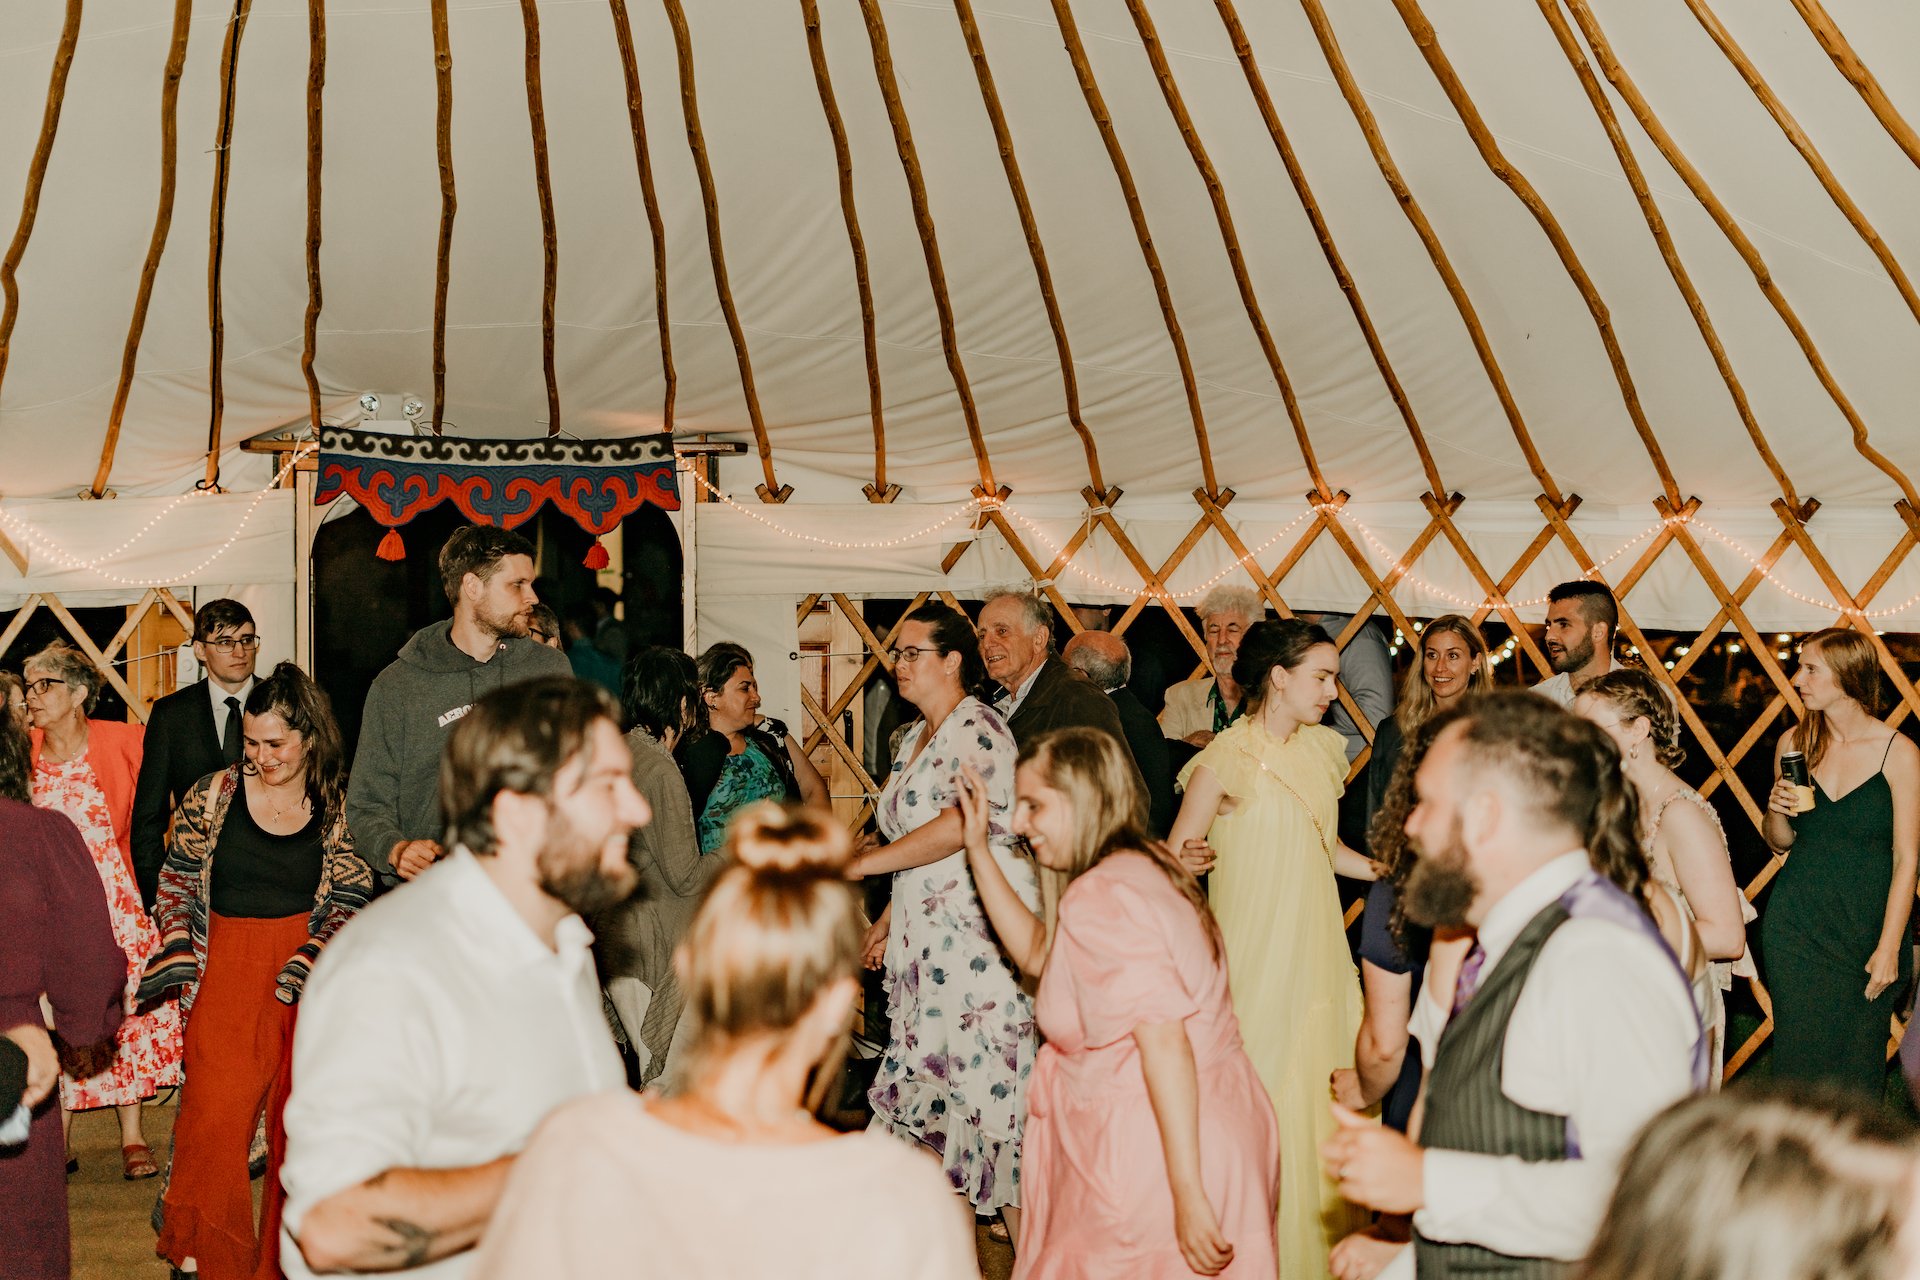 Guests dancing in the palace yurt with the door decoration.